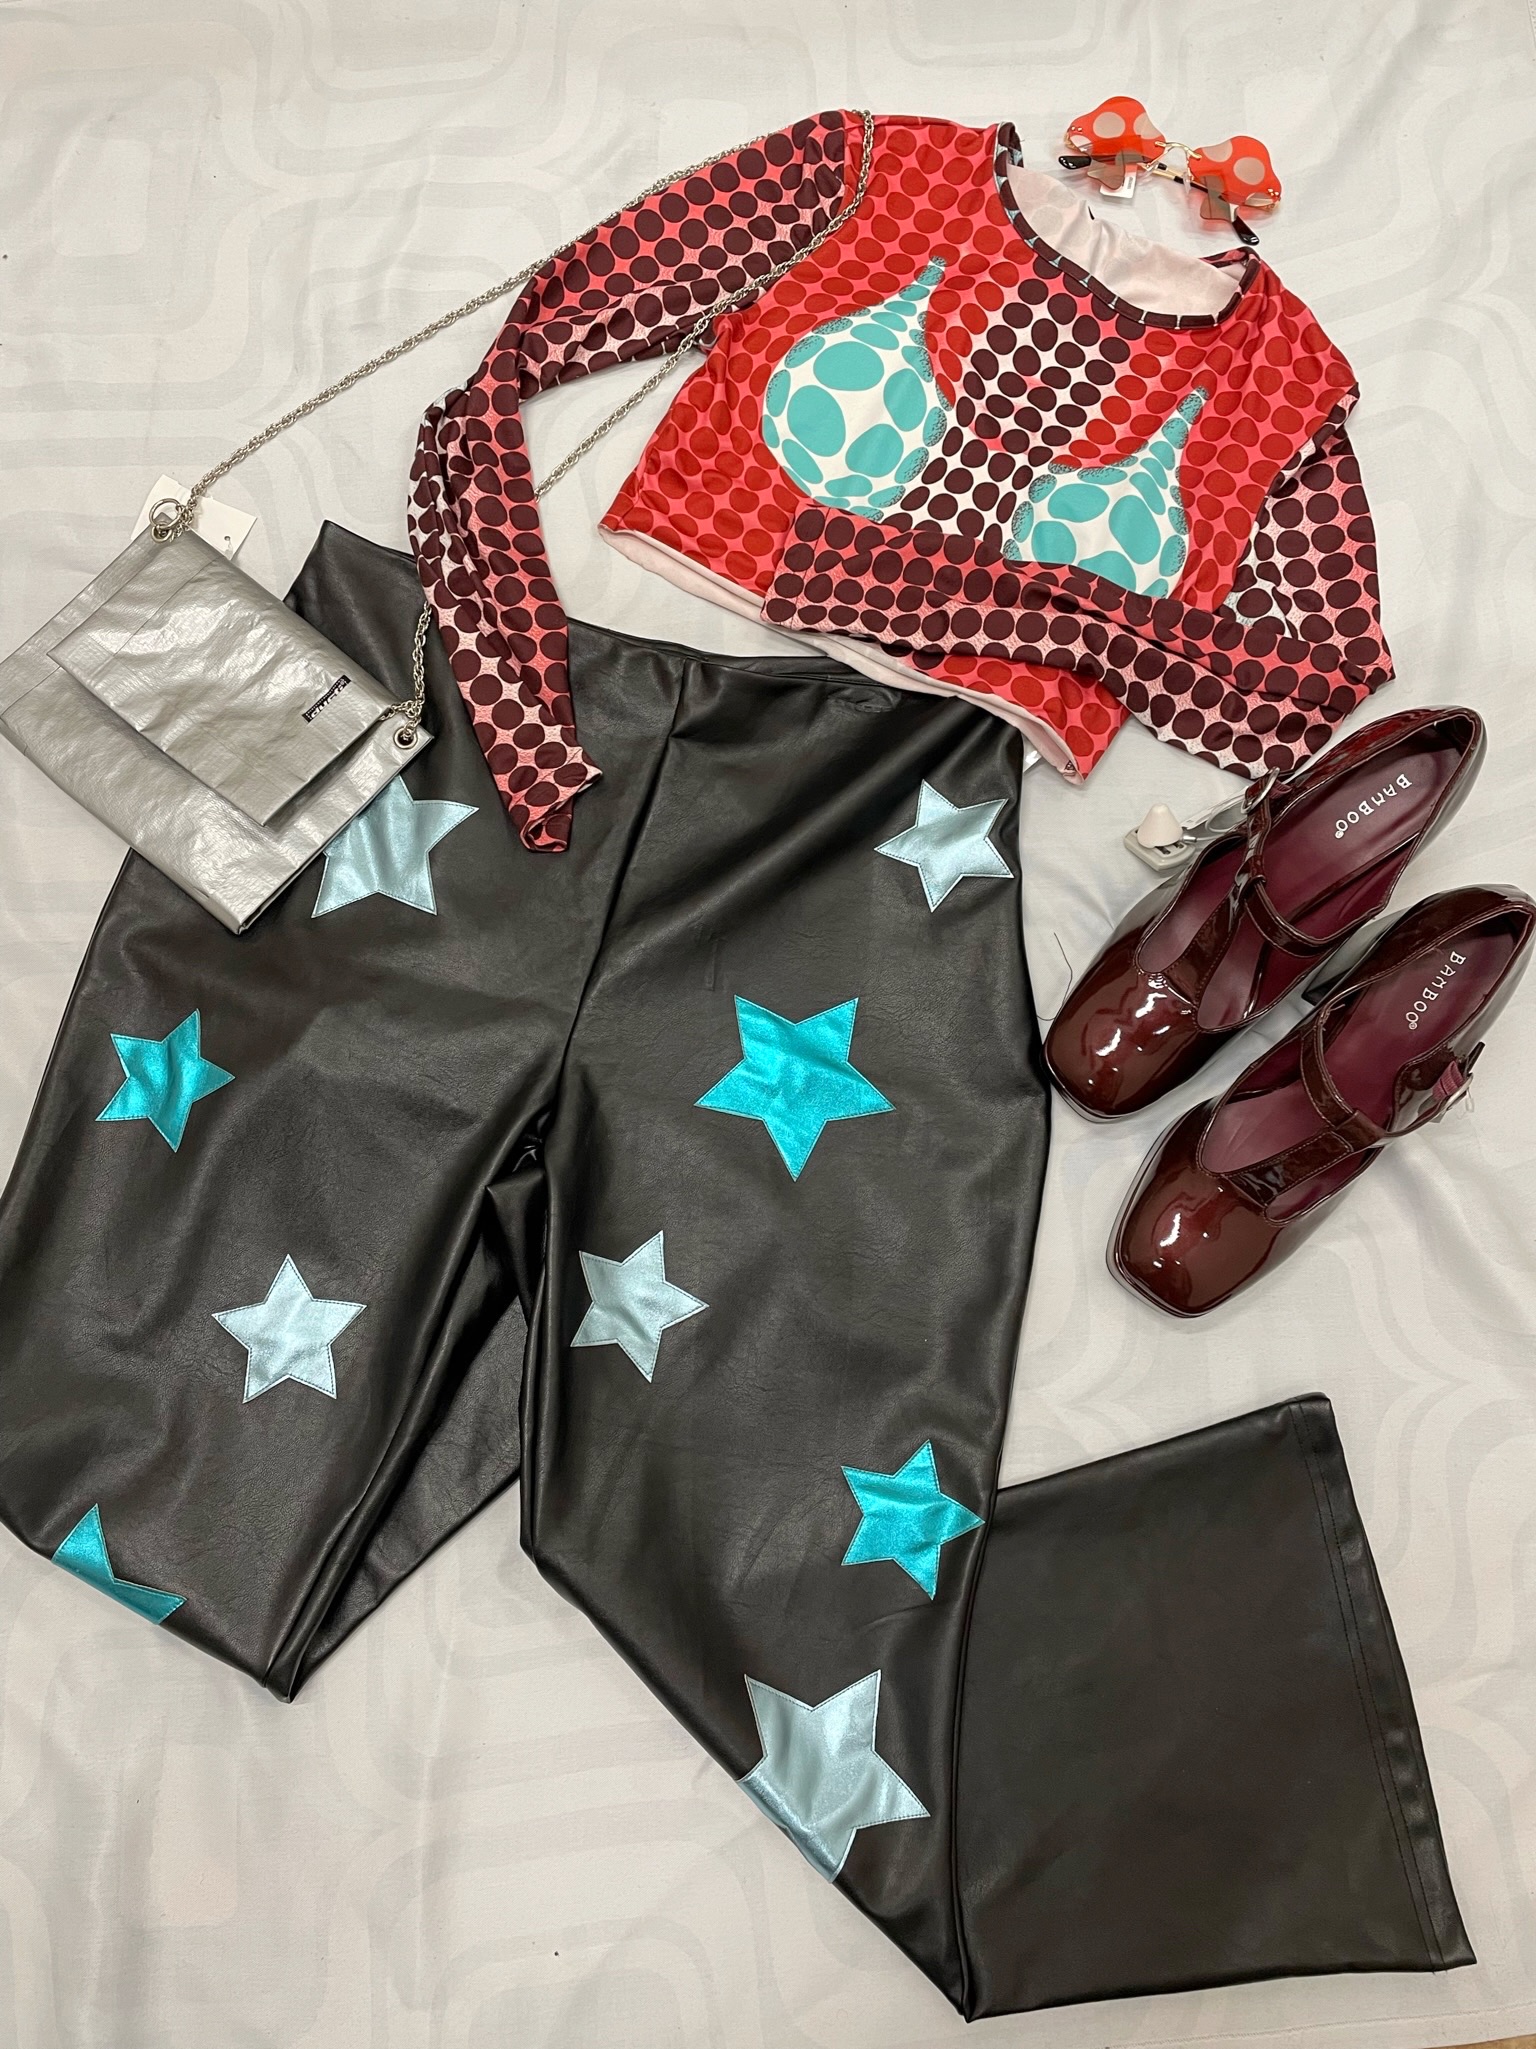 Outfit flatlay featuring black leather pants with metallic star details and a mesh top with a dotted print